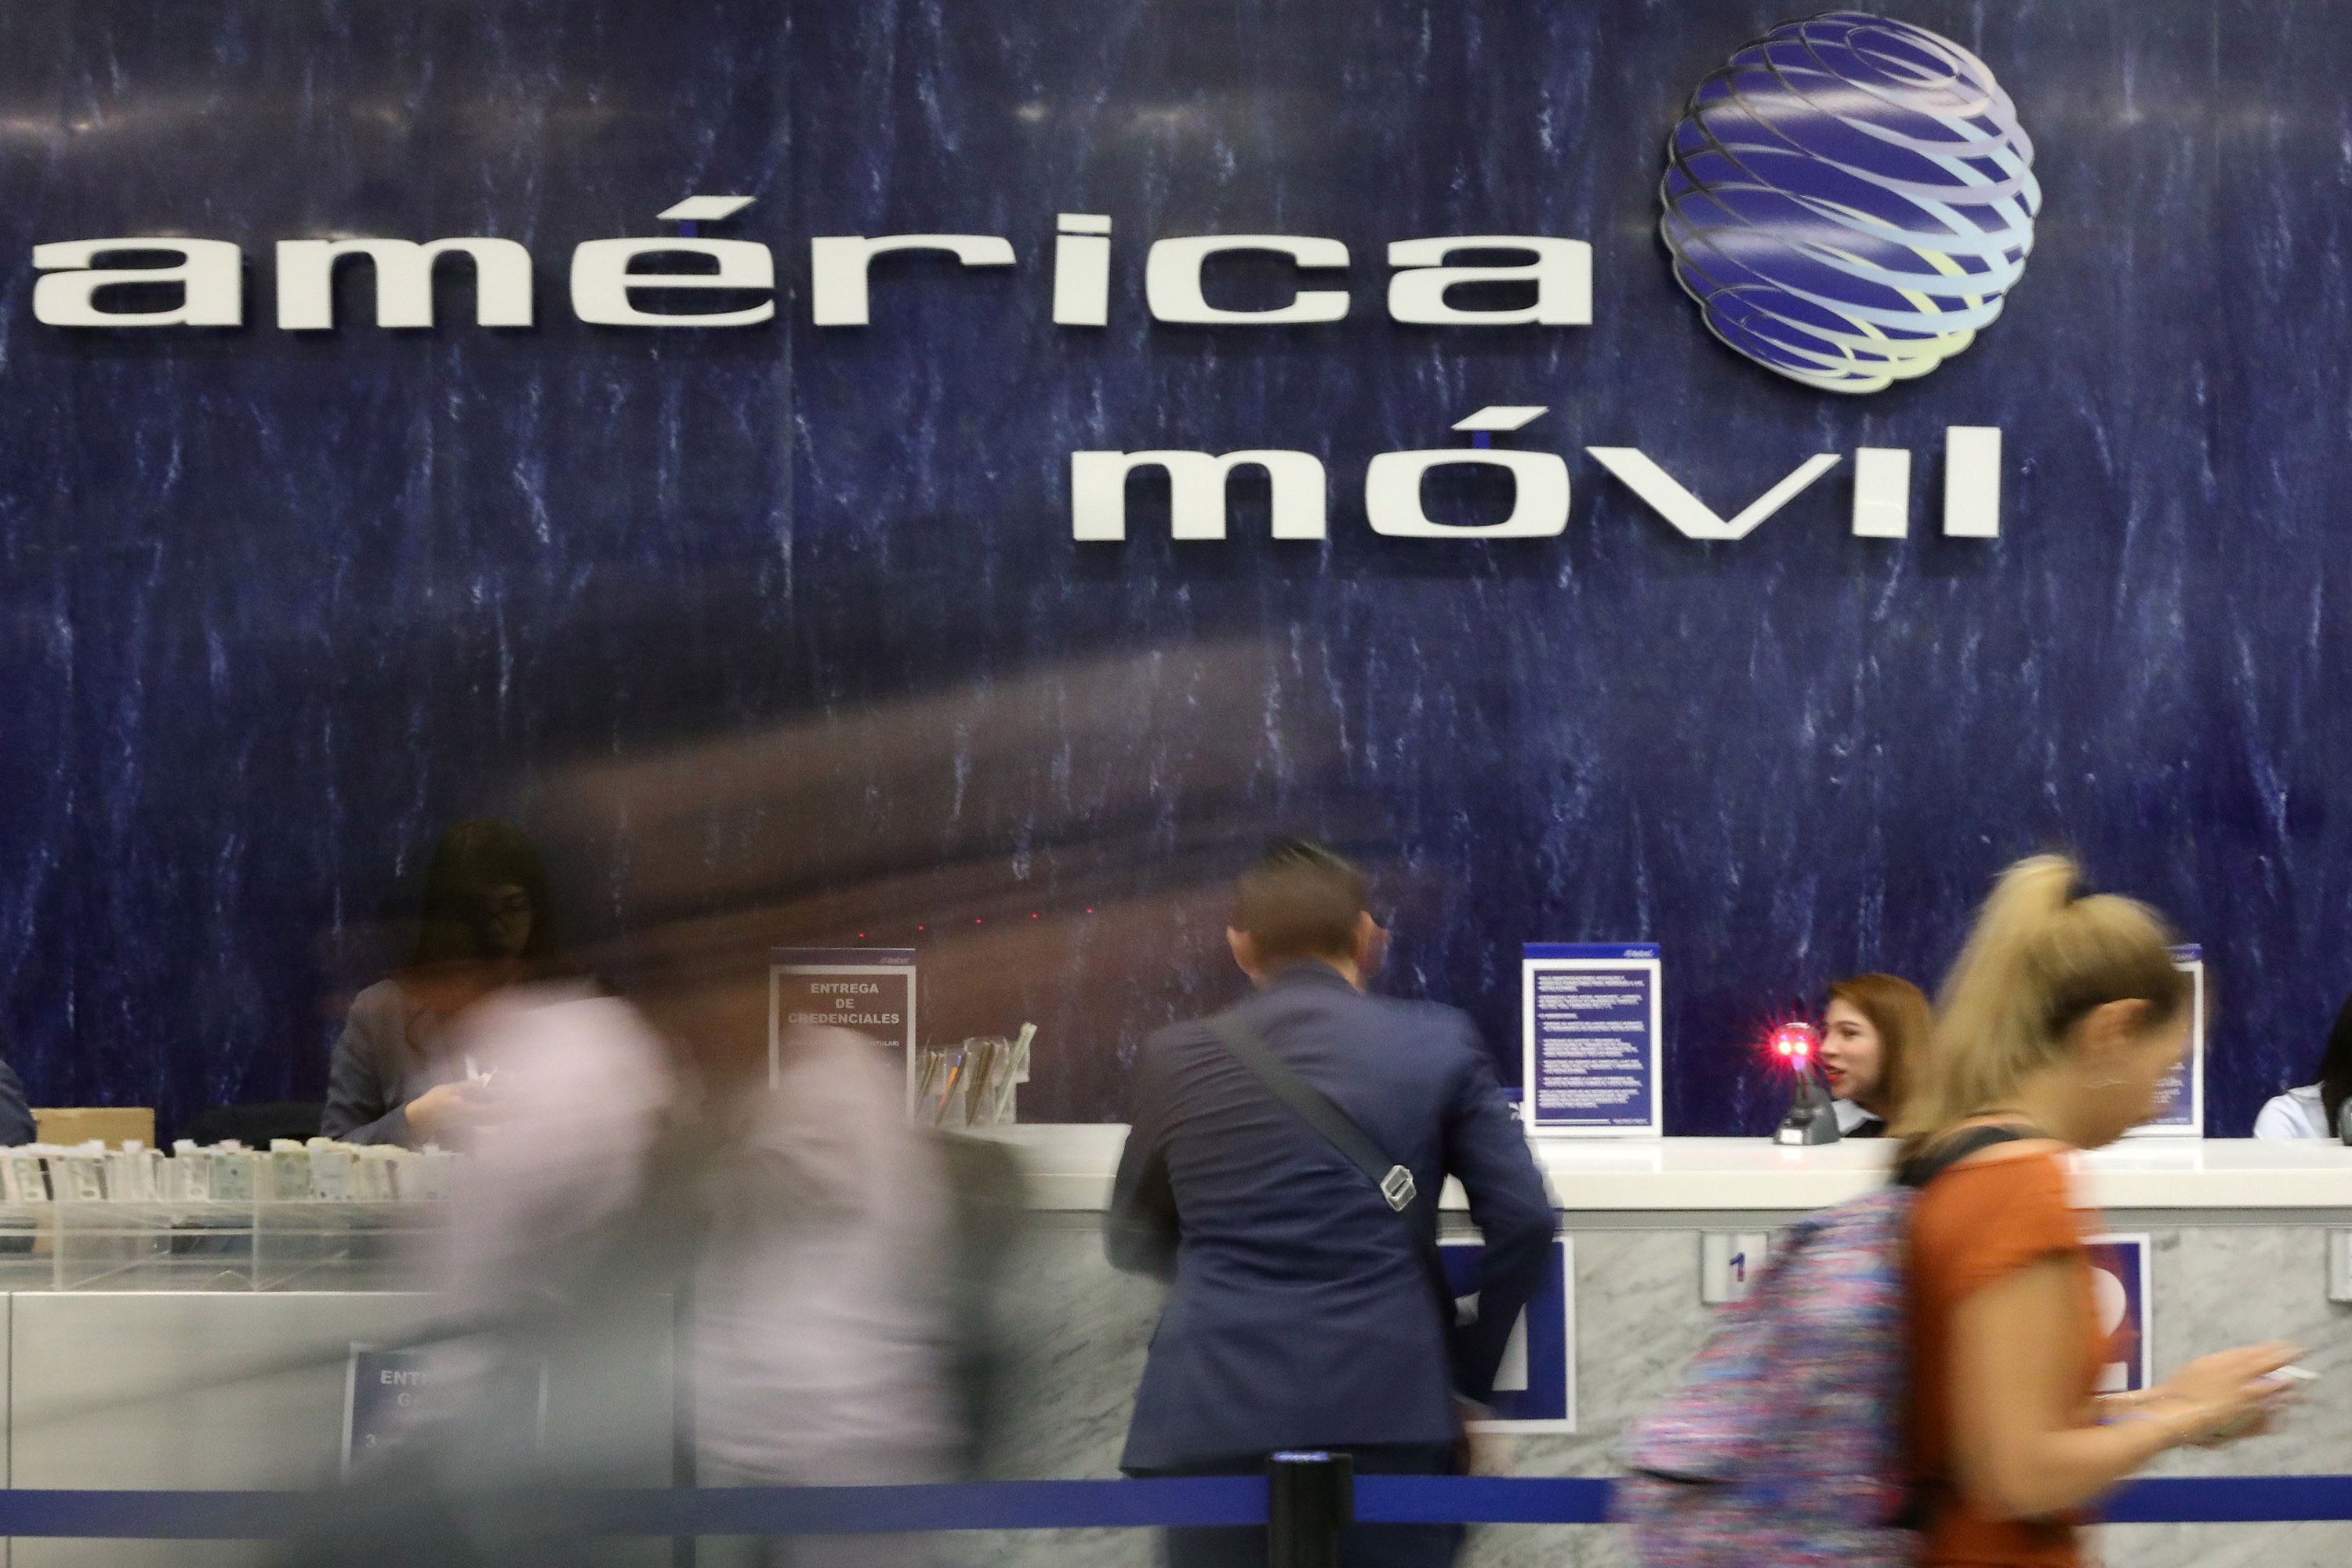 The logo of America Movil is pictured on the wall of a reception area in the company's corporate offices in Mexico City, Mexico, May 18, 2017. REUTERS/Edgard Garrido/File Photo